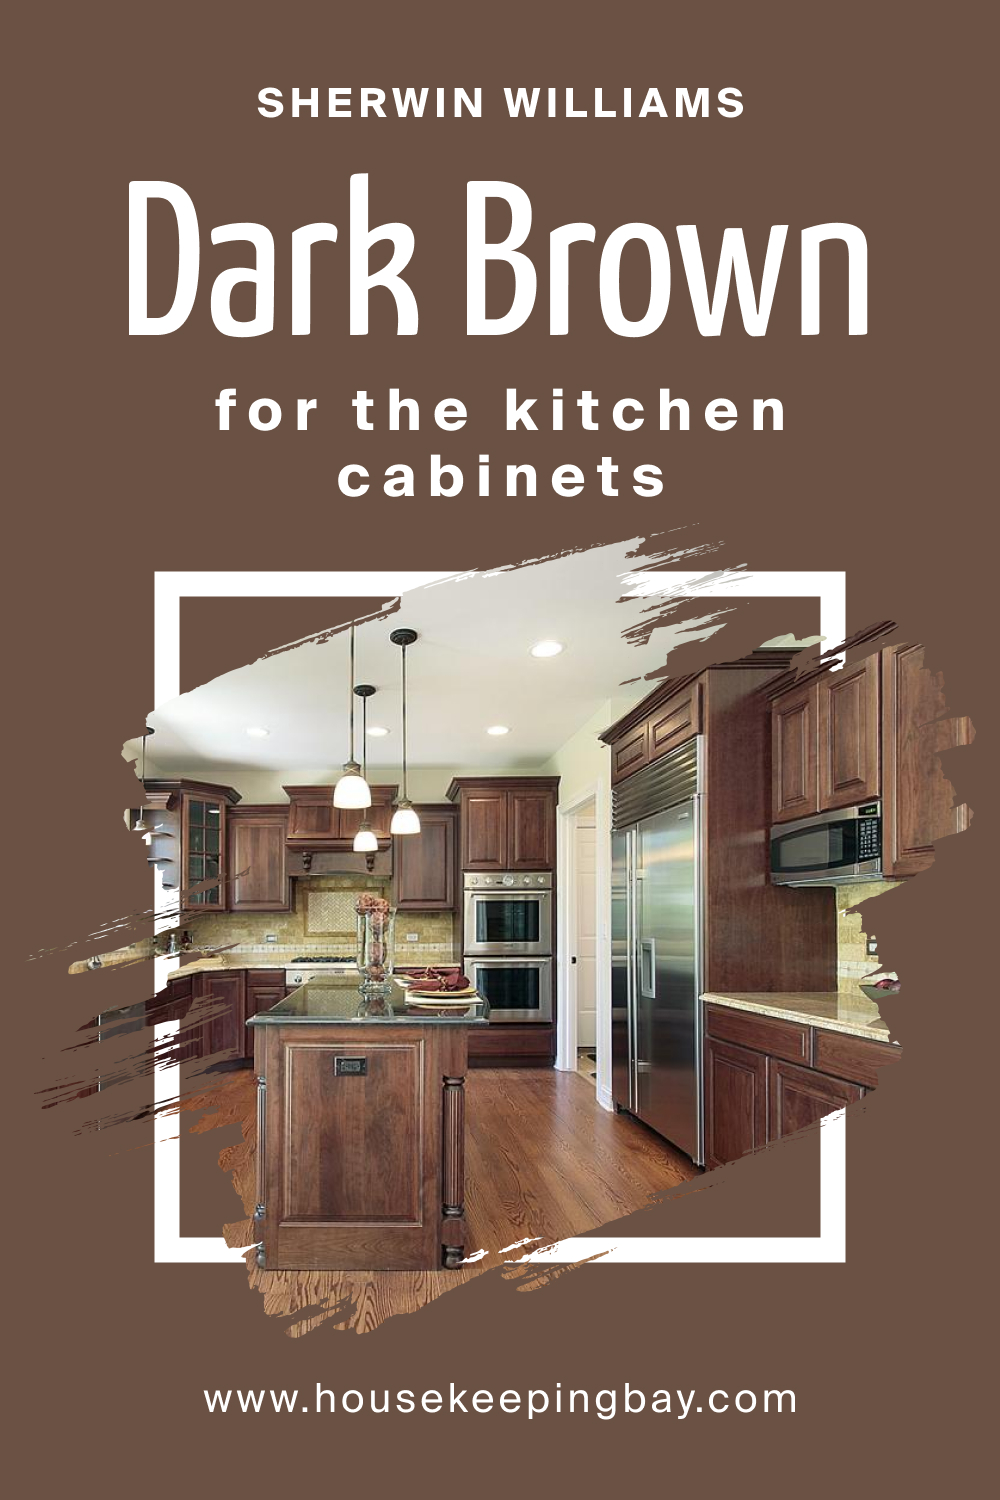 Sherwin Williams. SW 7520 Dark Brown For the Kitchen Cabinets